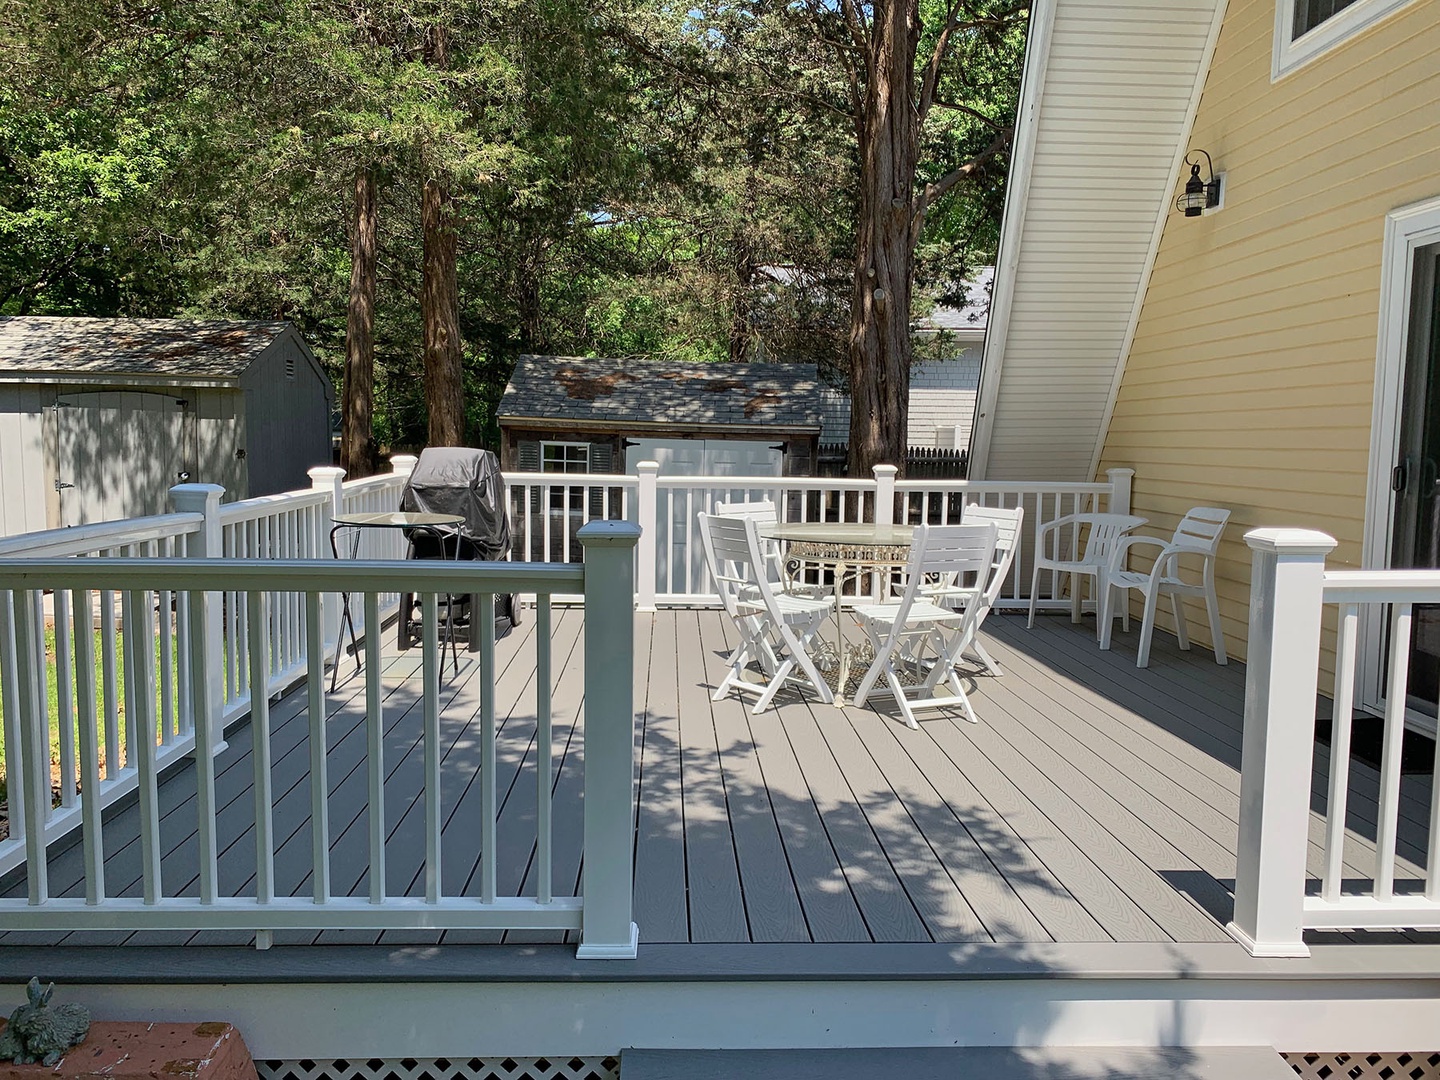 Grill, dine, or relax on the back porch.